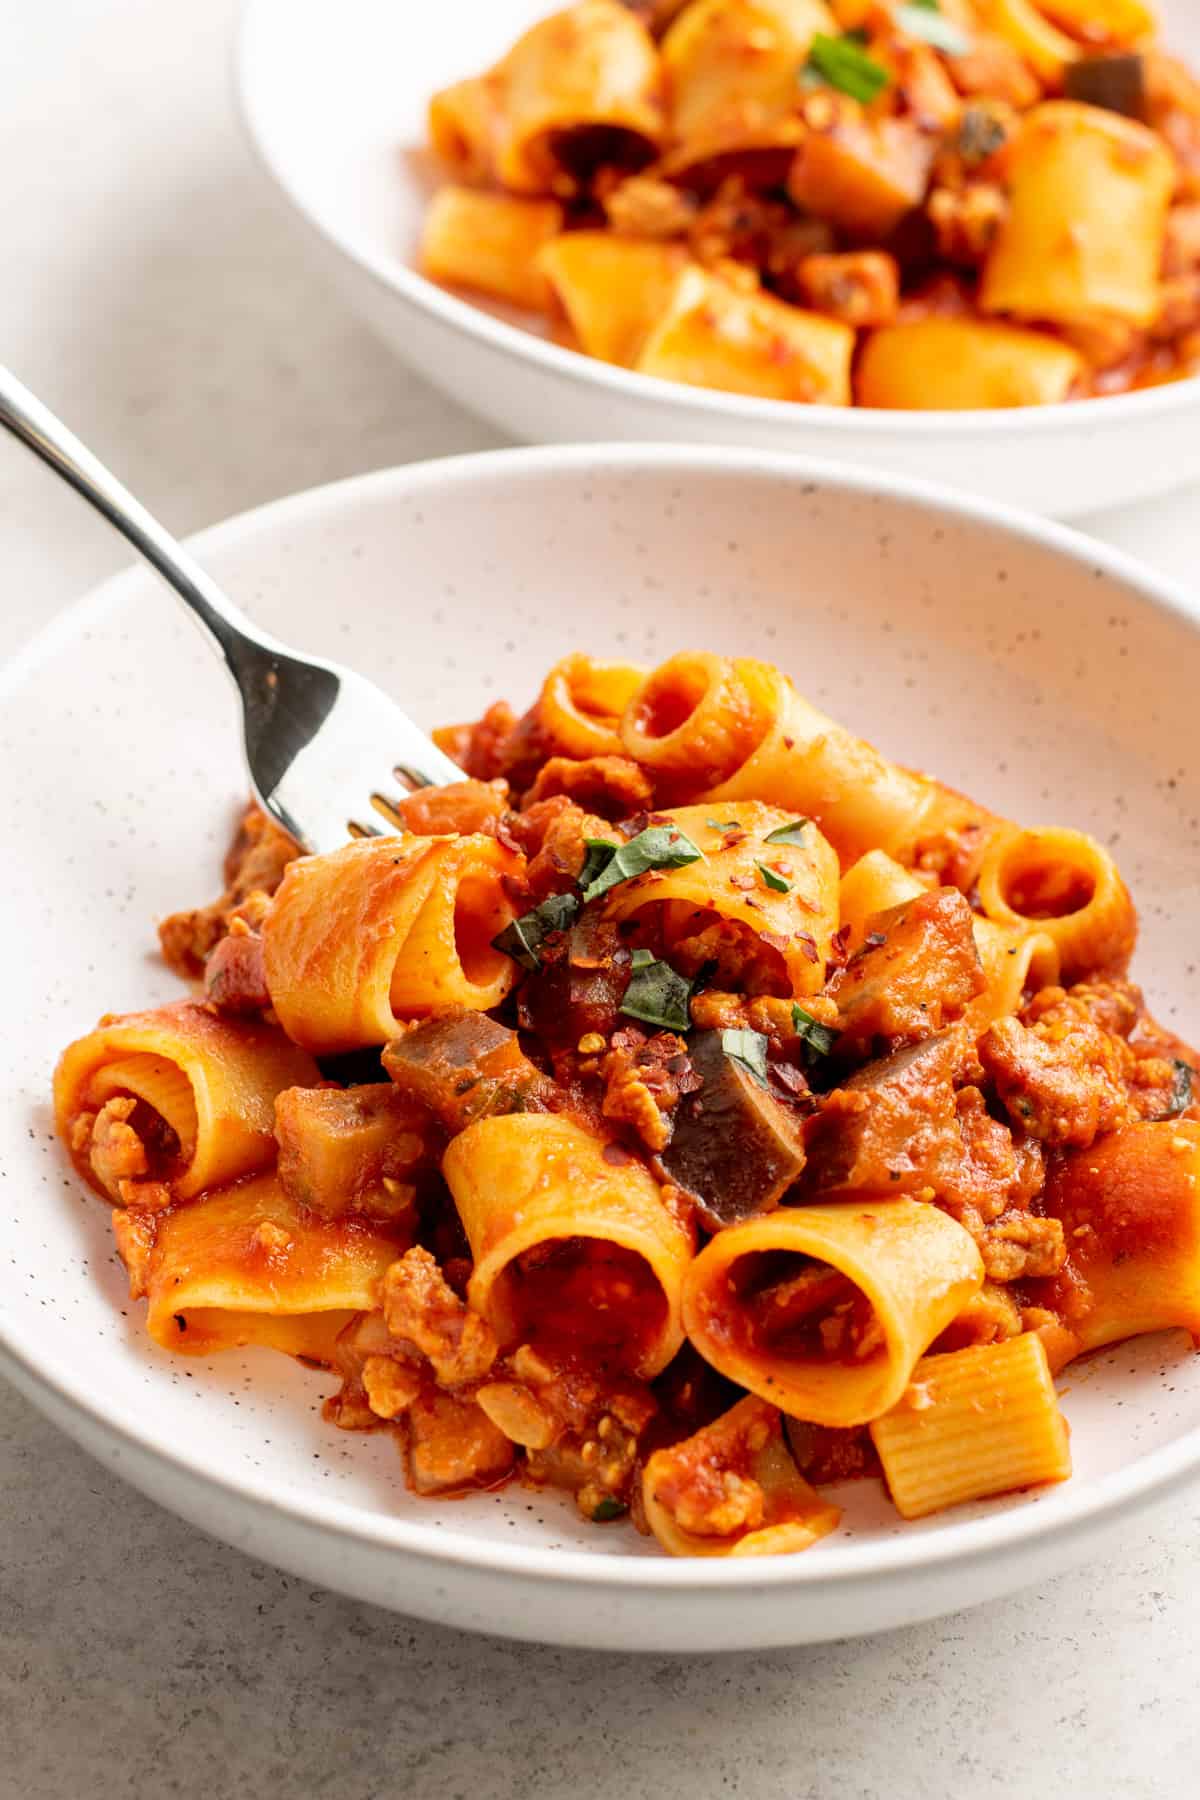 A plate of pasta with a fork and ground sausage recipes.